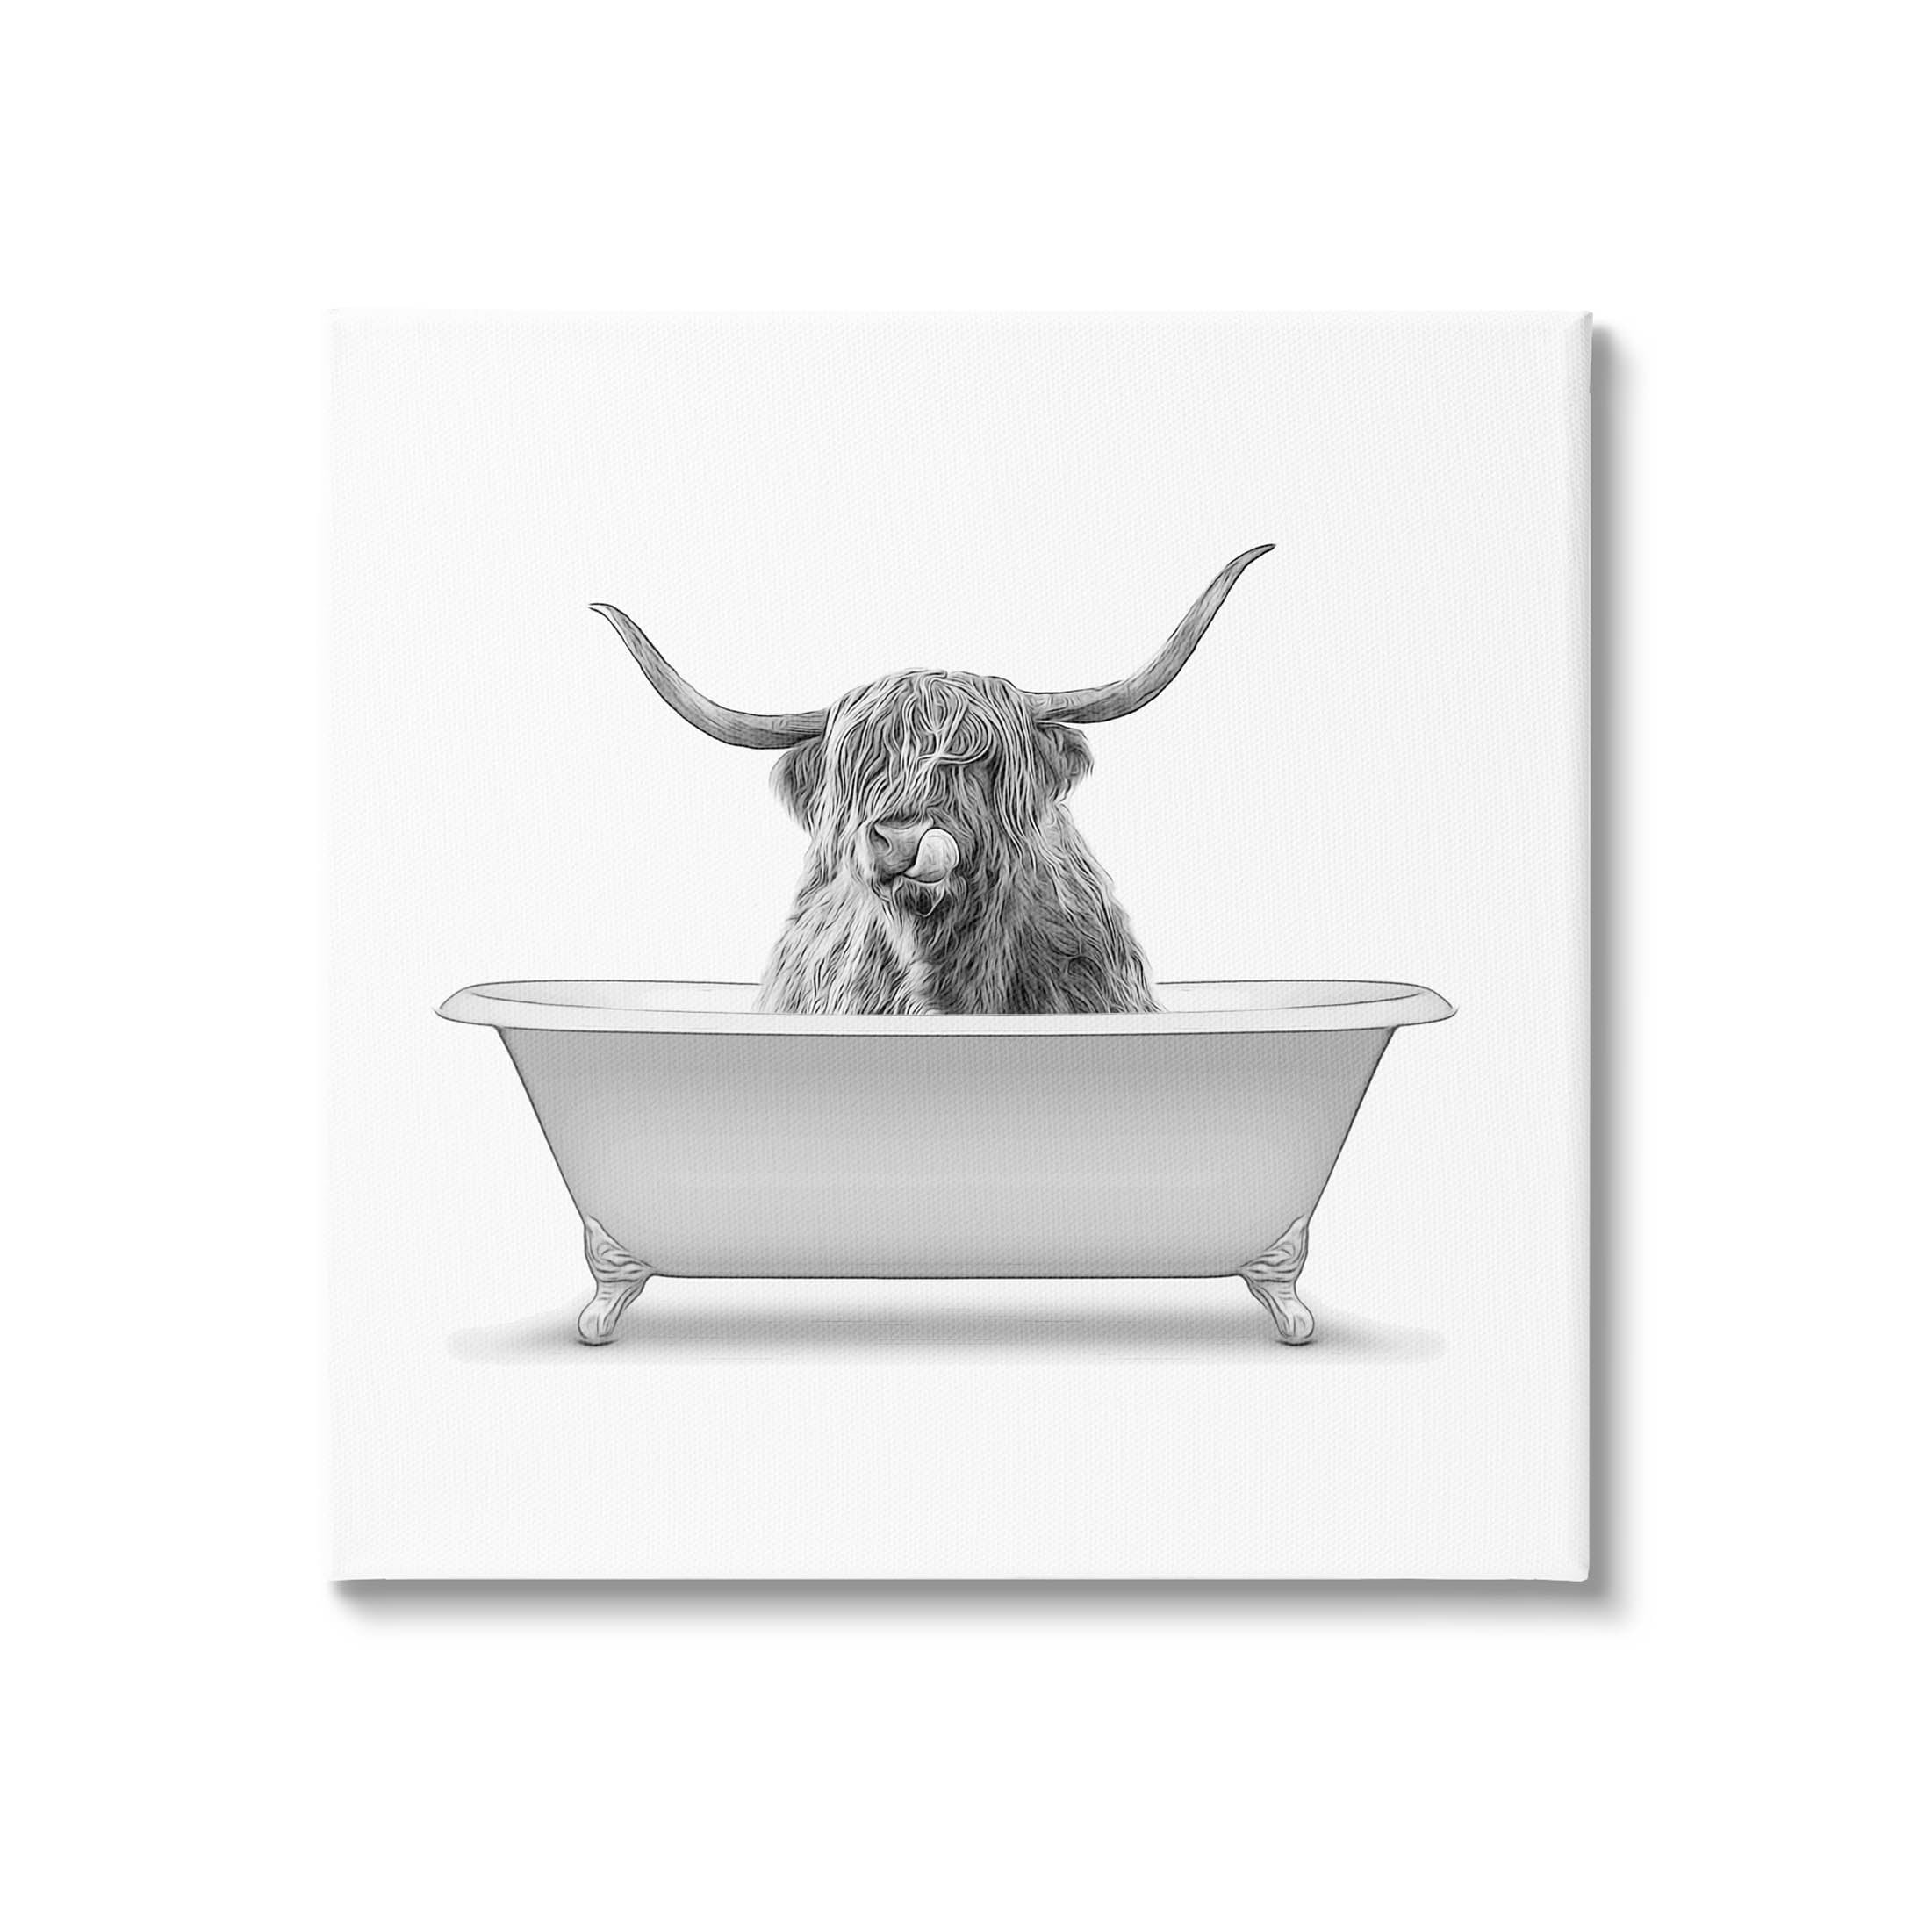 Stupell Industries Longhorn Highland Cow Bath Tub Graphic Art Gallery  Wrapped Canvas Print Wall Art, Design by Annalisa Latella